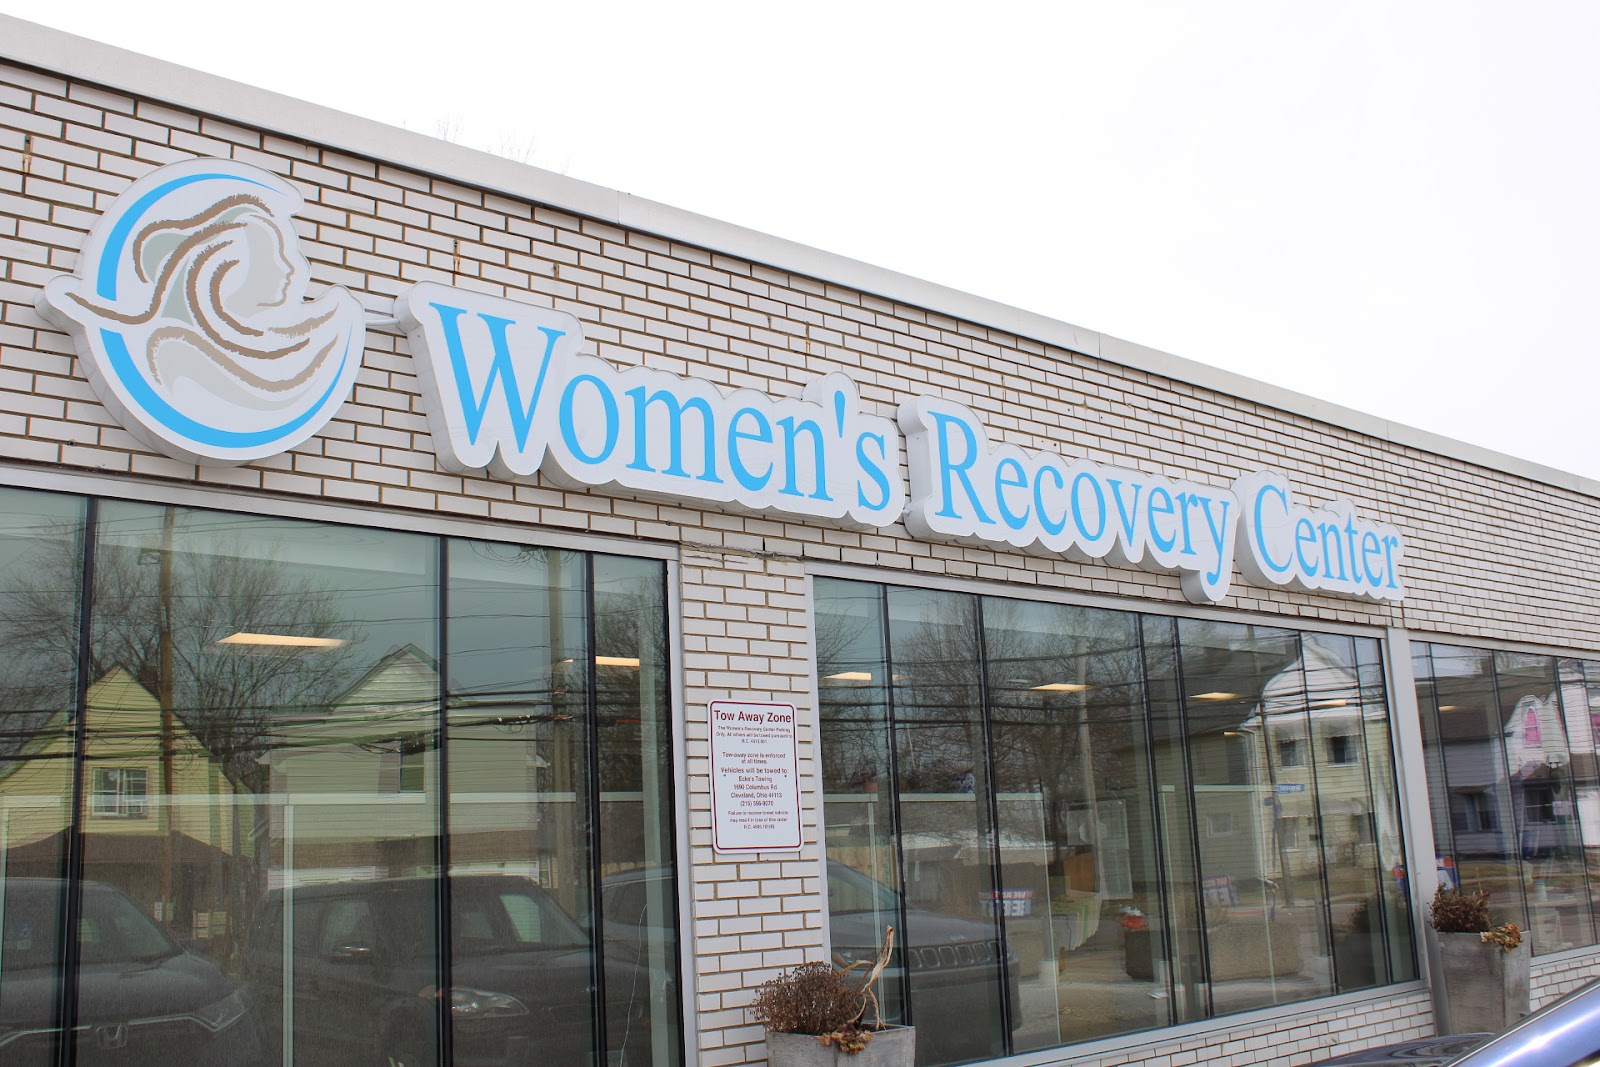 Women's Recovery Center